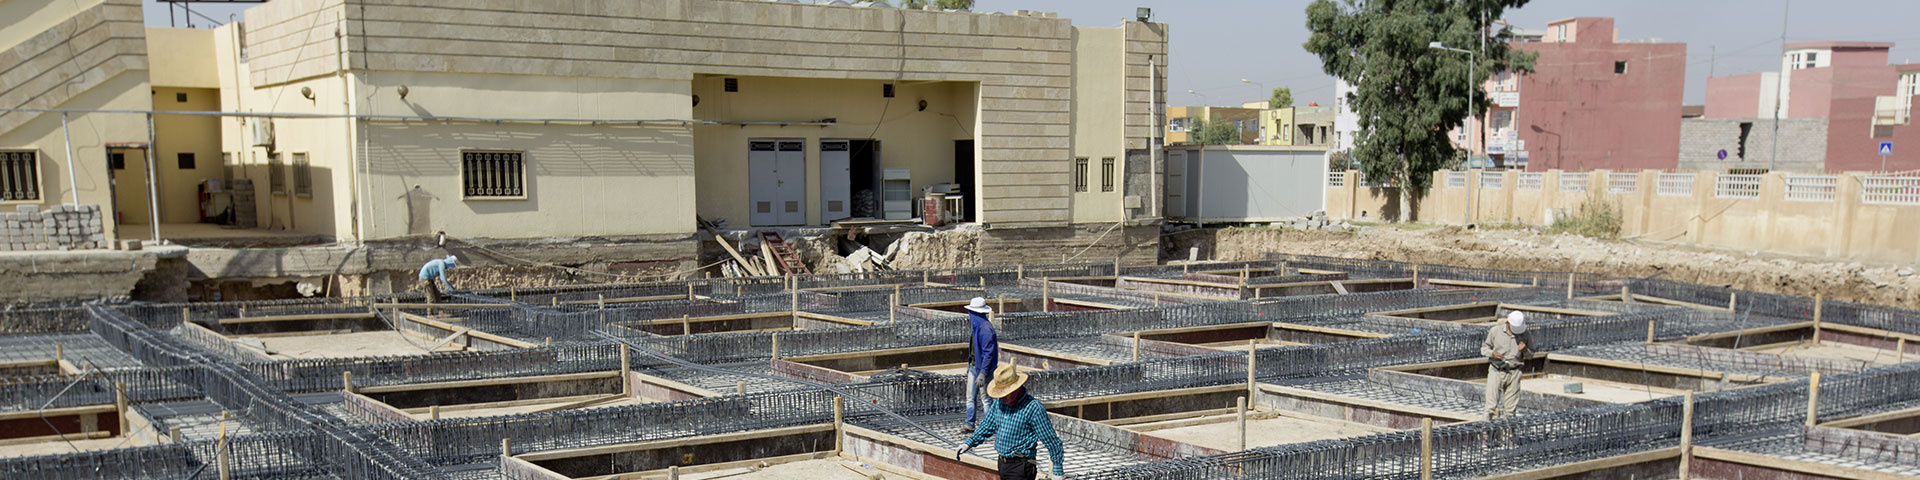 Men working on a house construction site